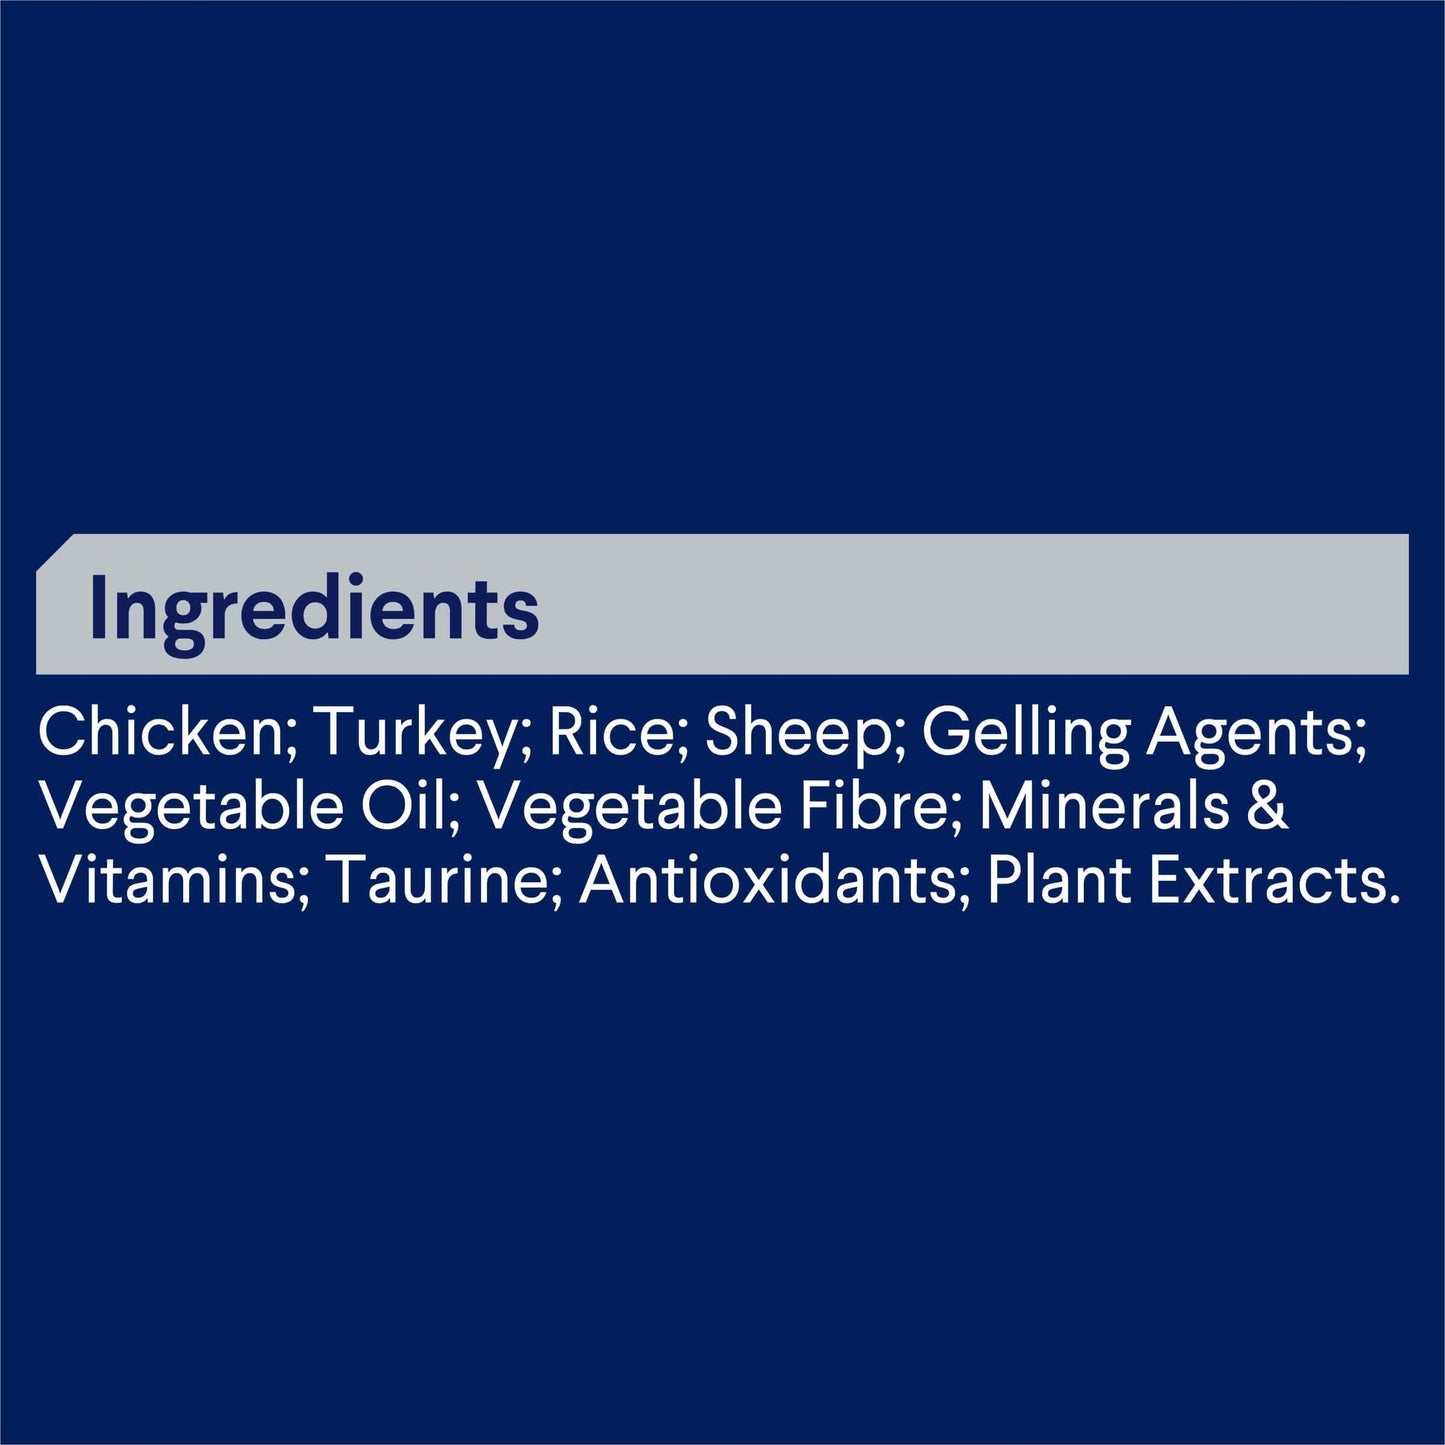 Advance Adult All Breed Chicken Turkey and Rice Canned Dog Food